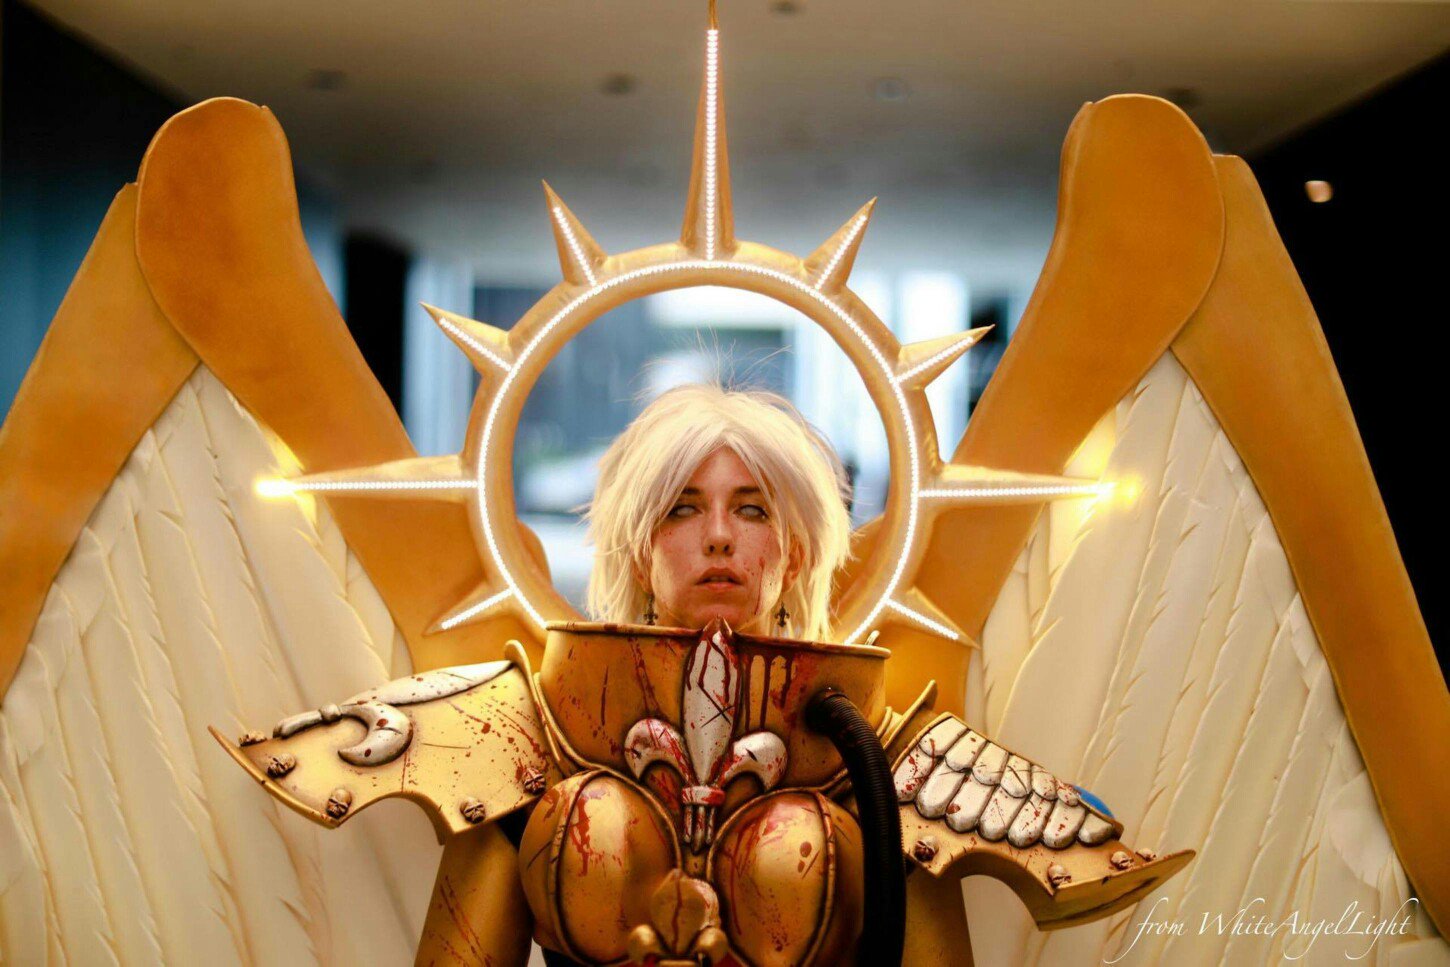 OnTableTop on X: Check out this amazing cosplay of Saint Celestine by  Russian crafty person Polina Vishnevskaya - a superb take on the #40K  warrior woman. Bring on 2019 and the Sisters